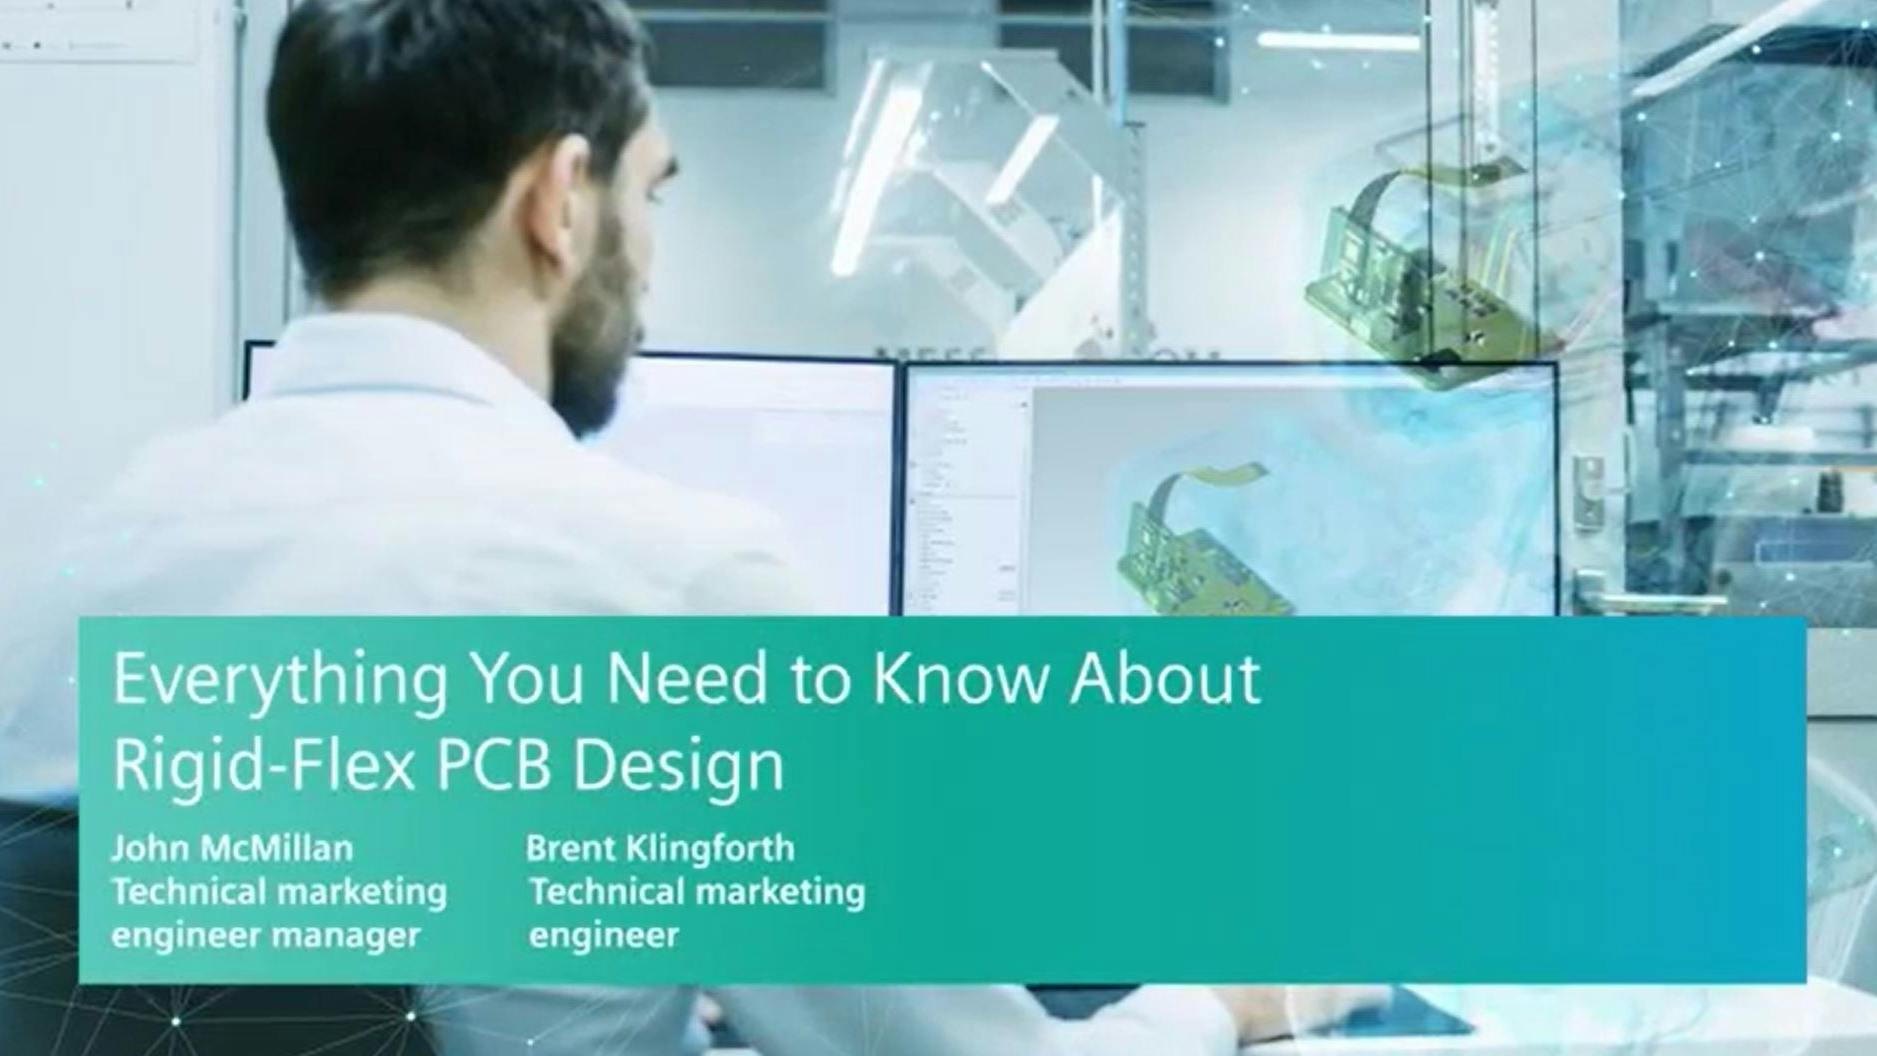 Everything You Need to Know About Rigid-Flex PCB Design